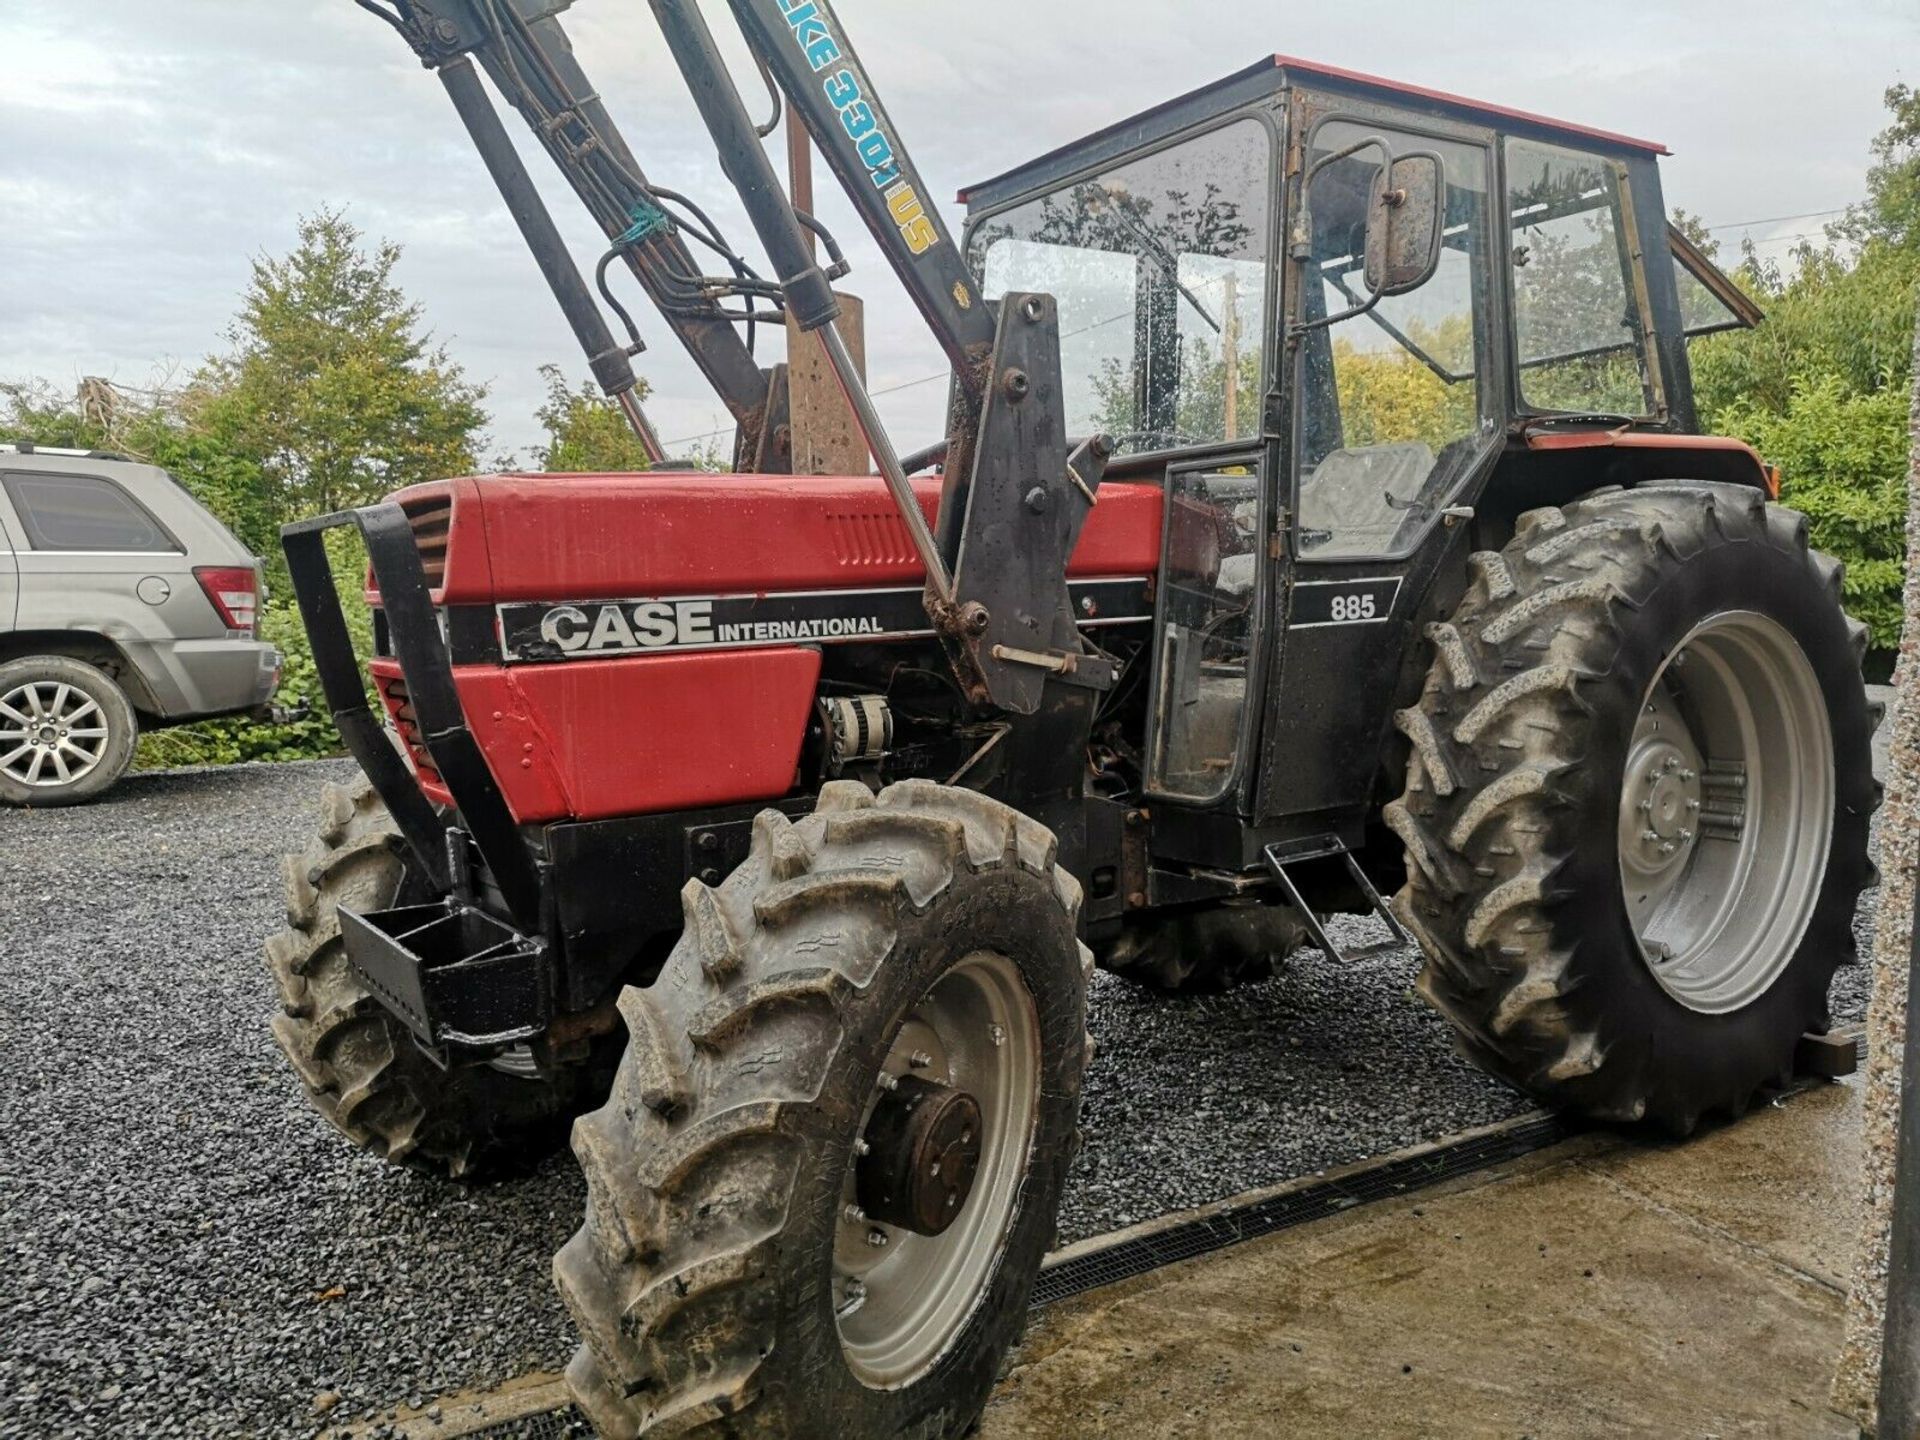 Case international 885 l and quickie loader - Image 3 of 5